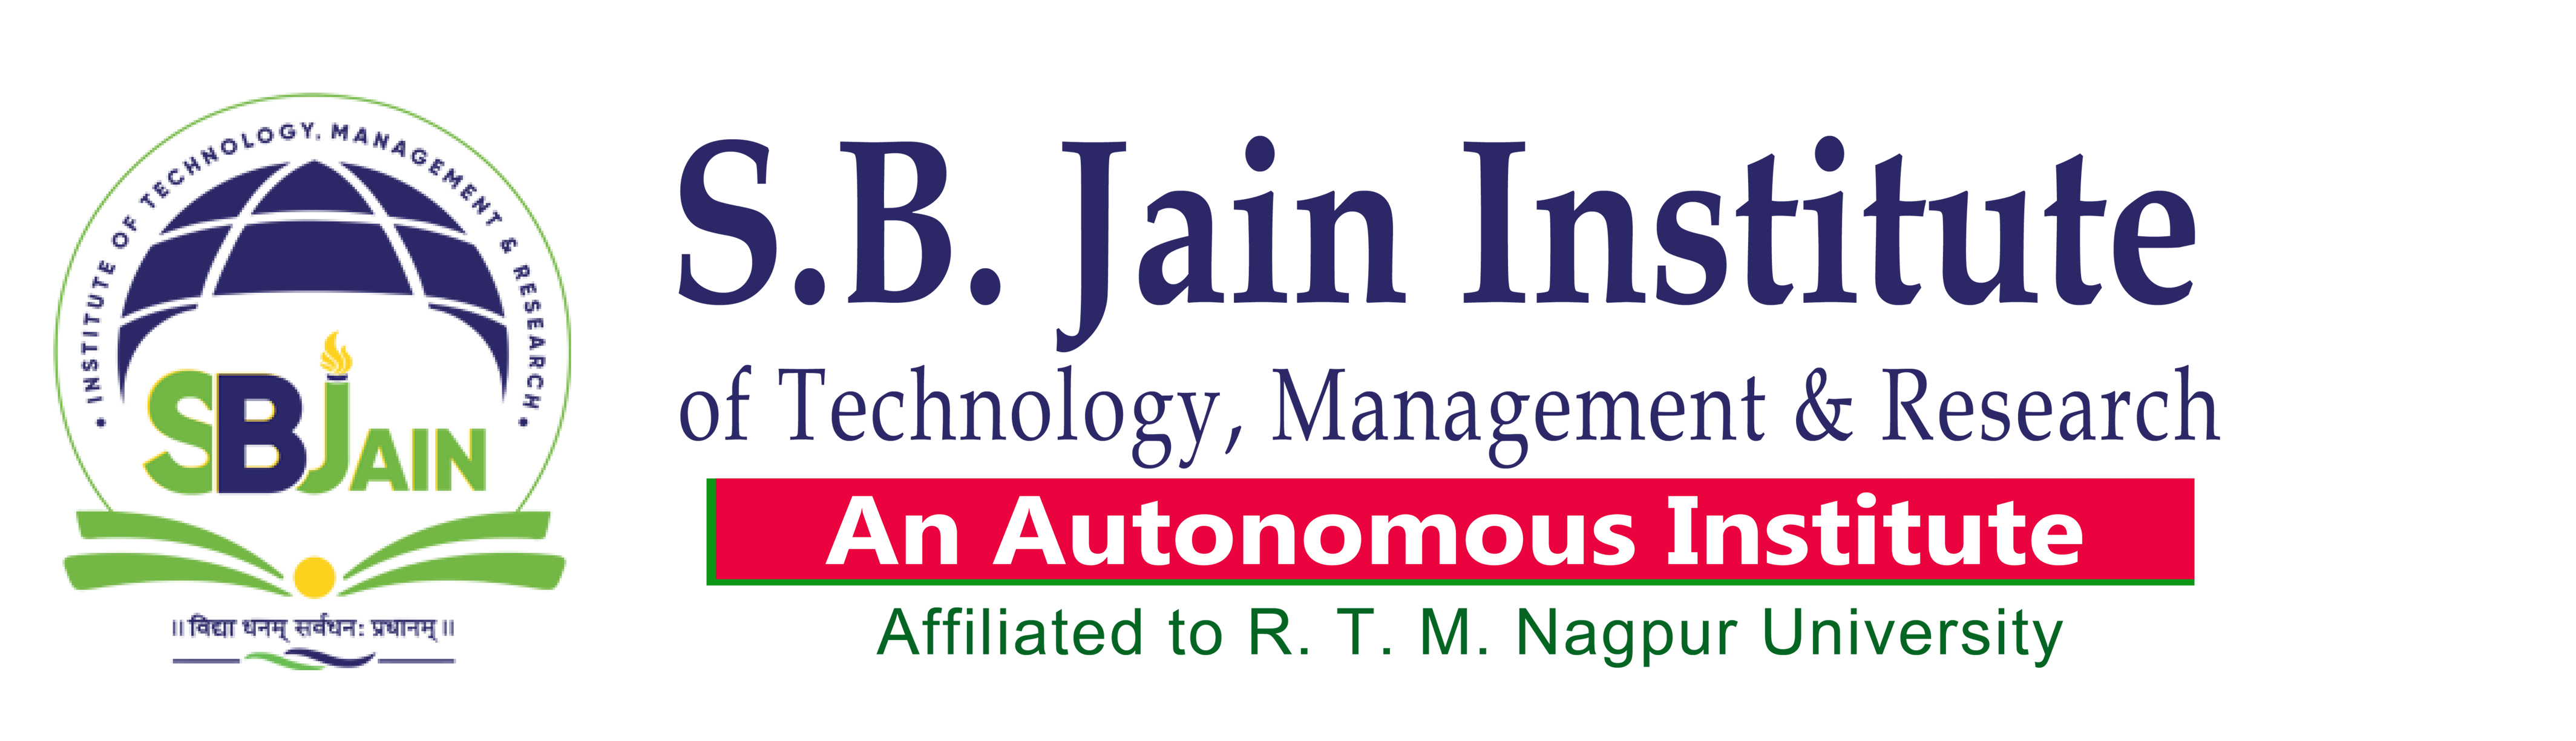 S. B. Jain Institute of Technology, Management and Research, Nagpur